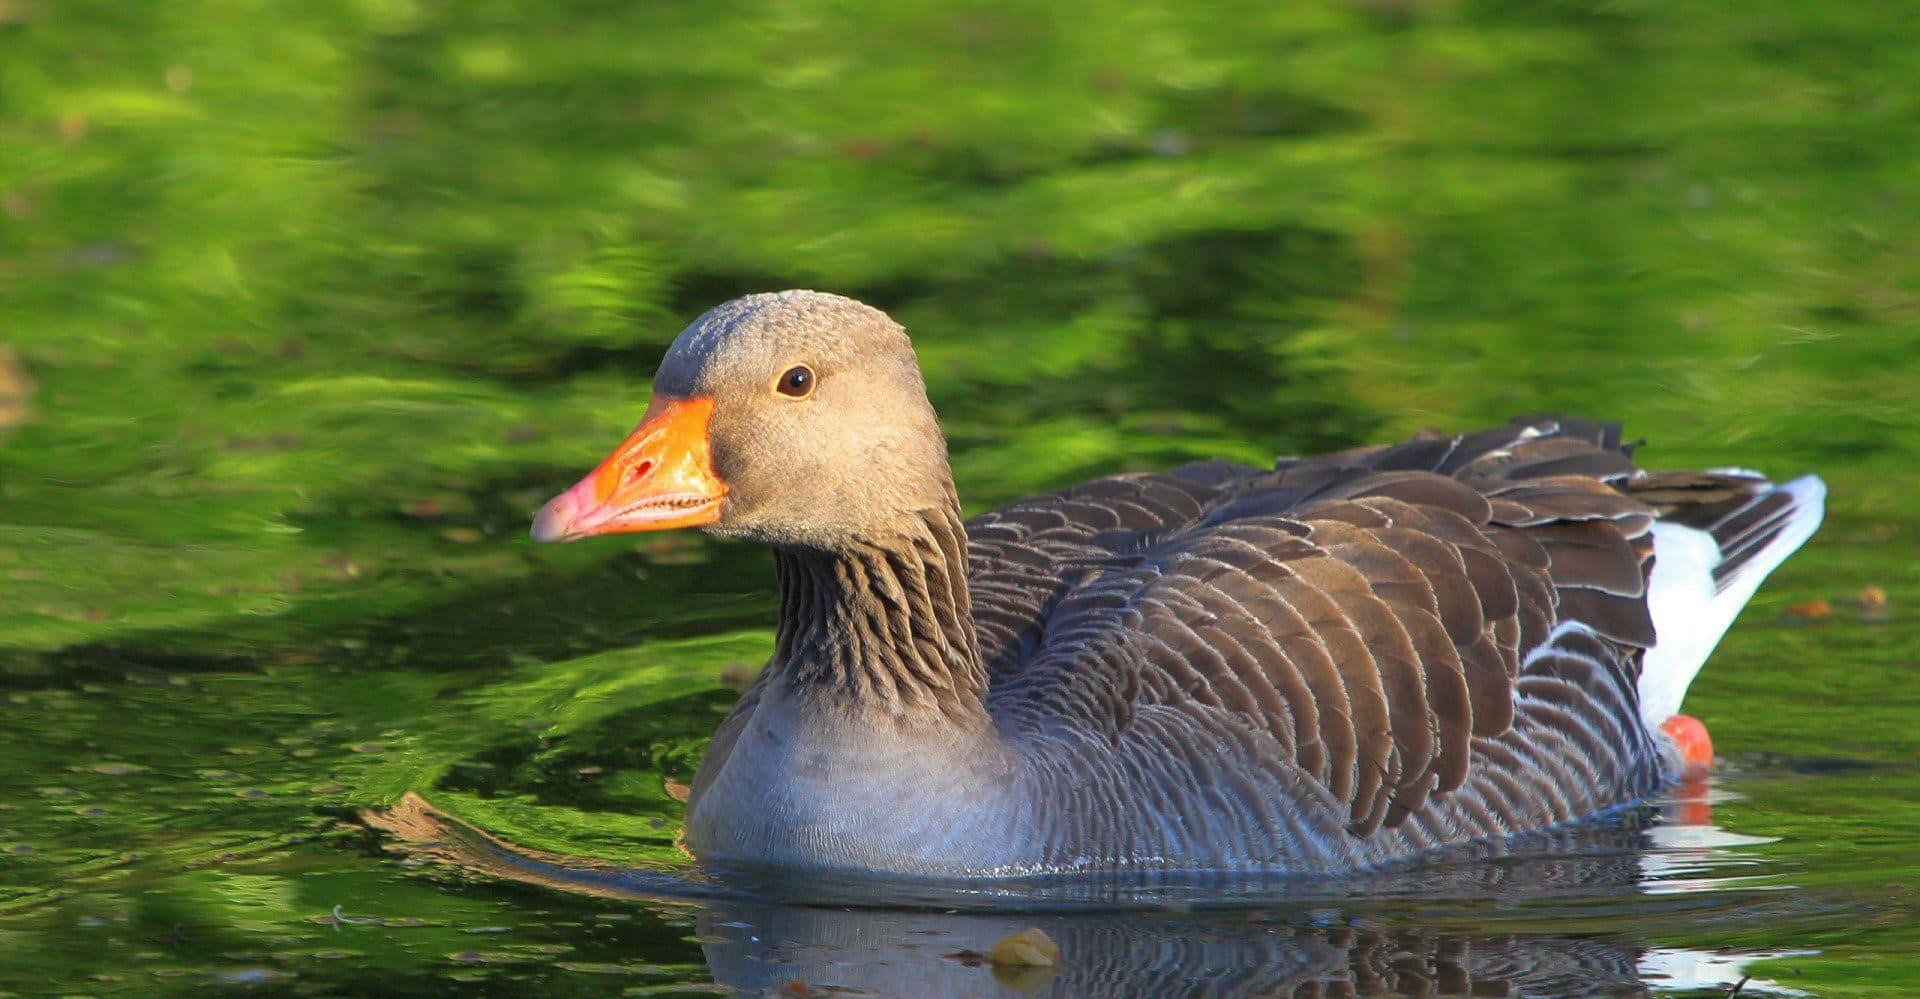 A Beautiful Solitary Goose By The Lake